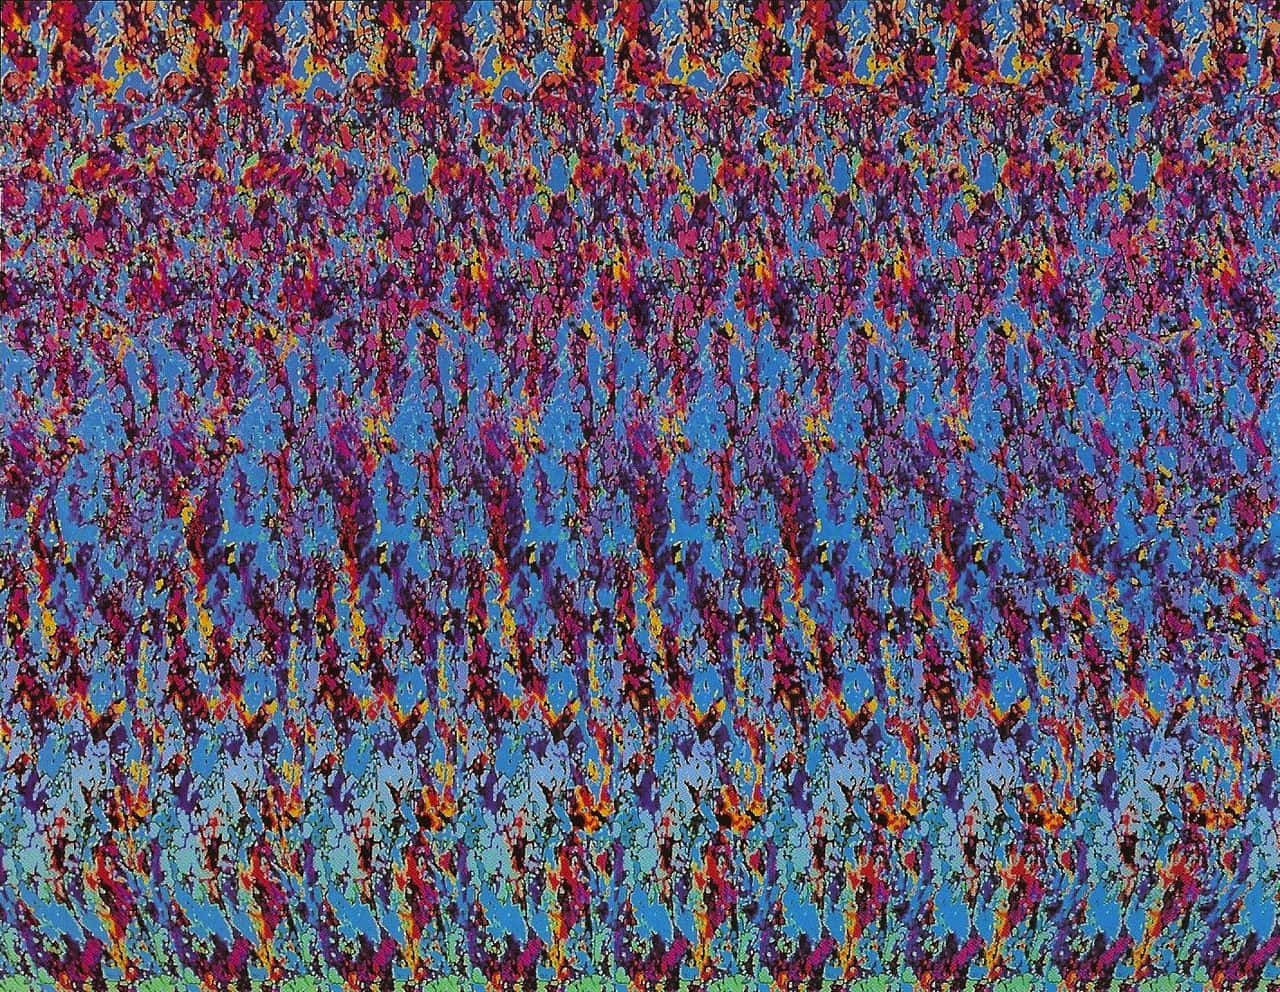 See the hidden image in this Magic Eye illusion Wallpaper